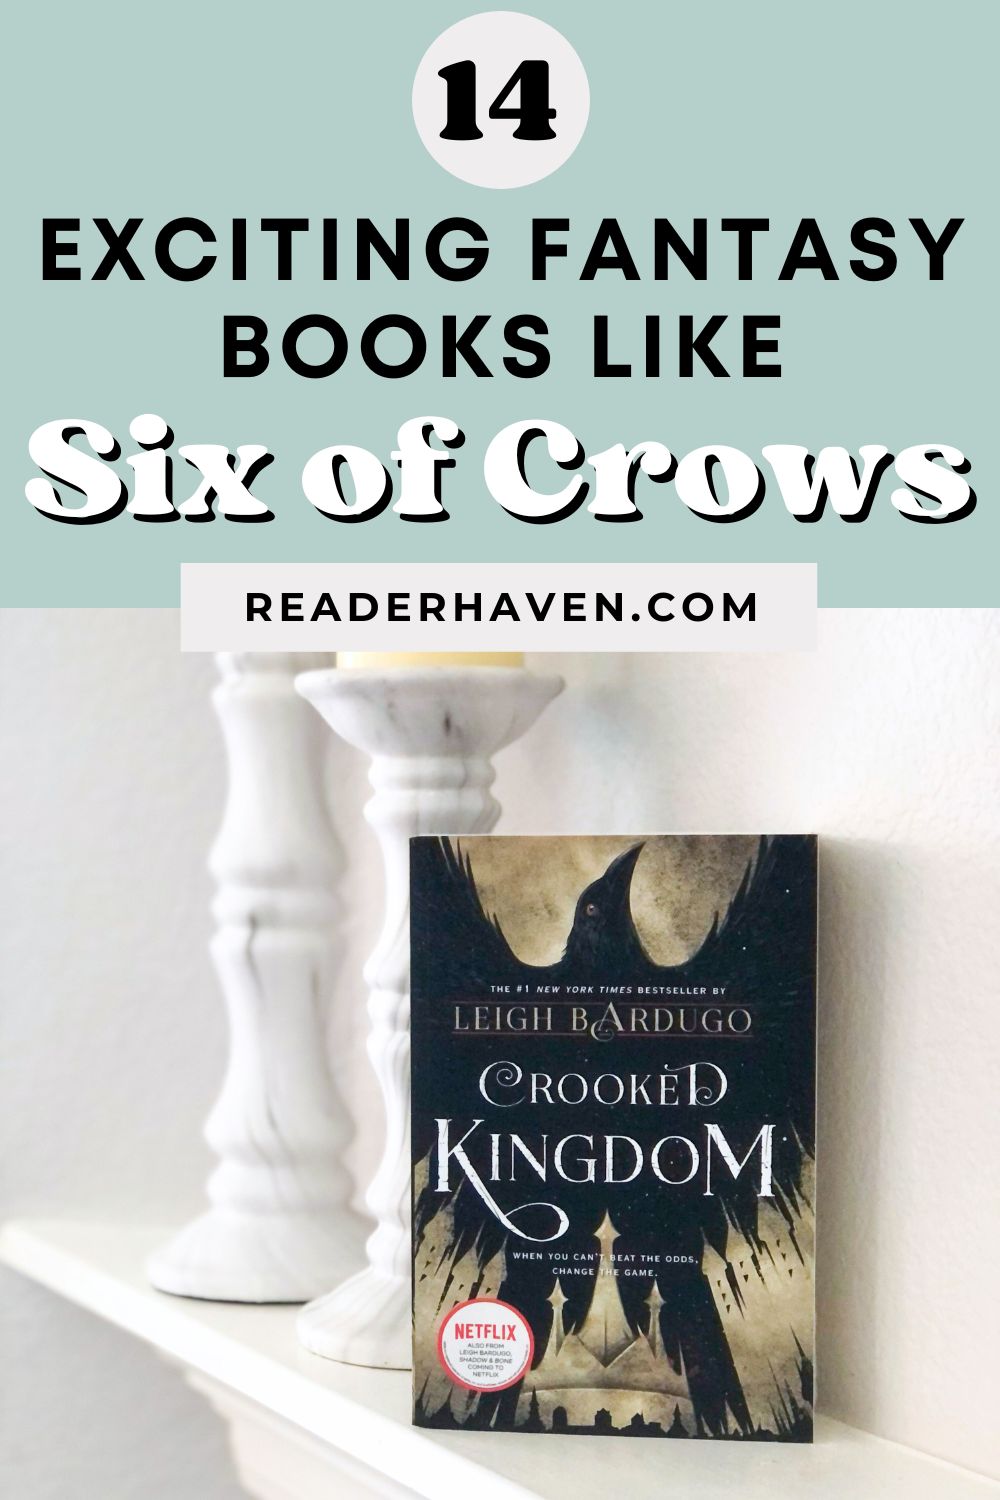 fantasy books like Six of Crows by Leigh Bardugo